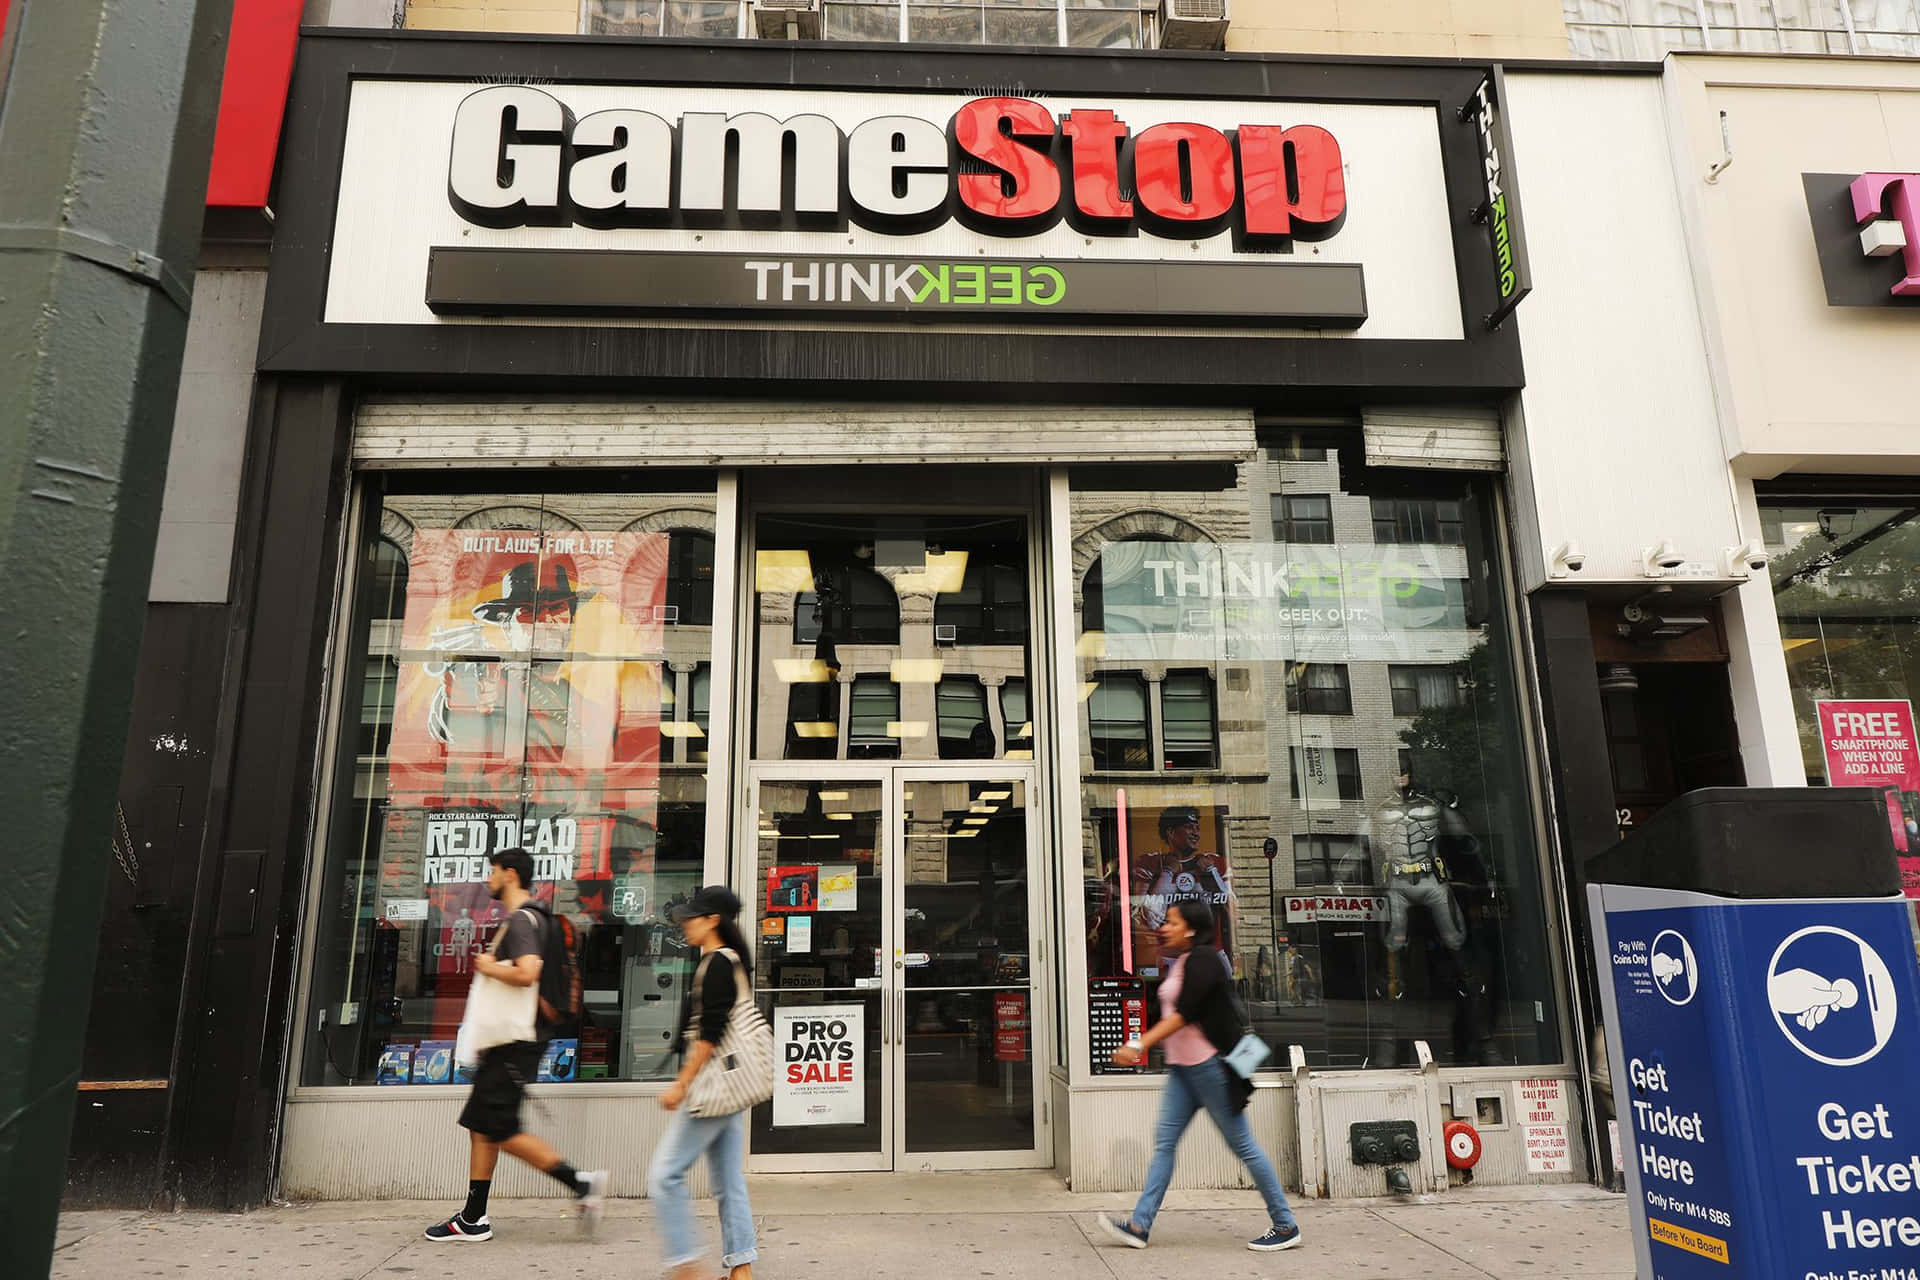 Get your hands on the latest games at Gamestop.